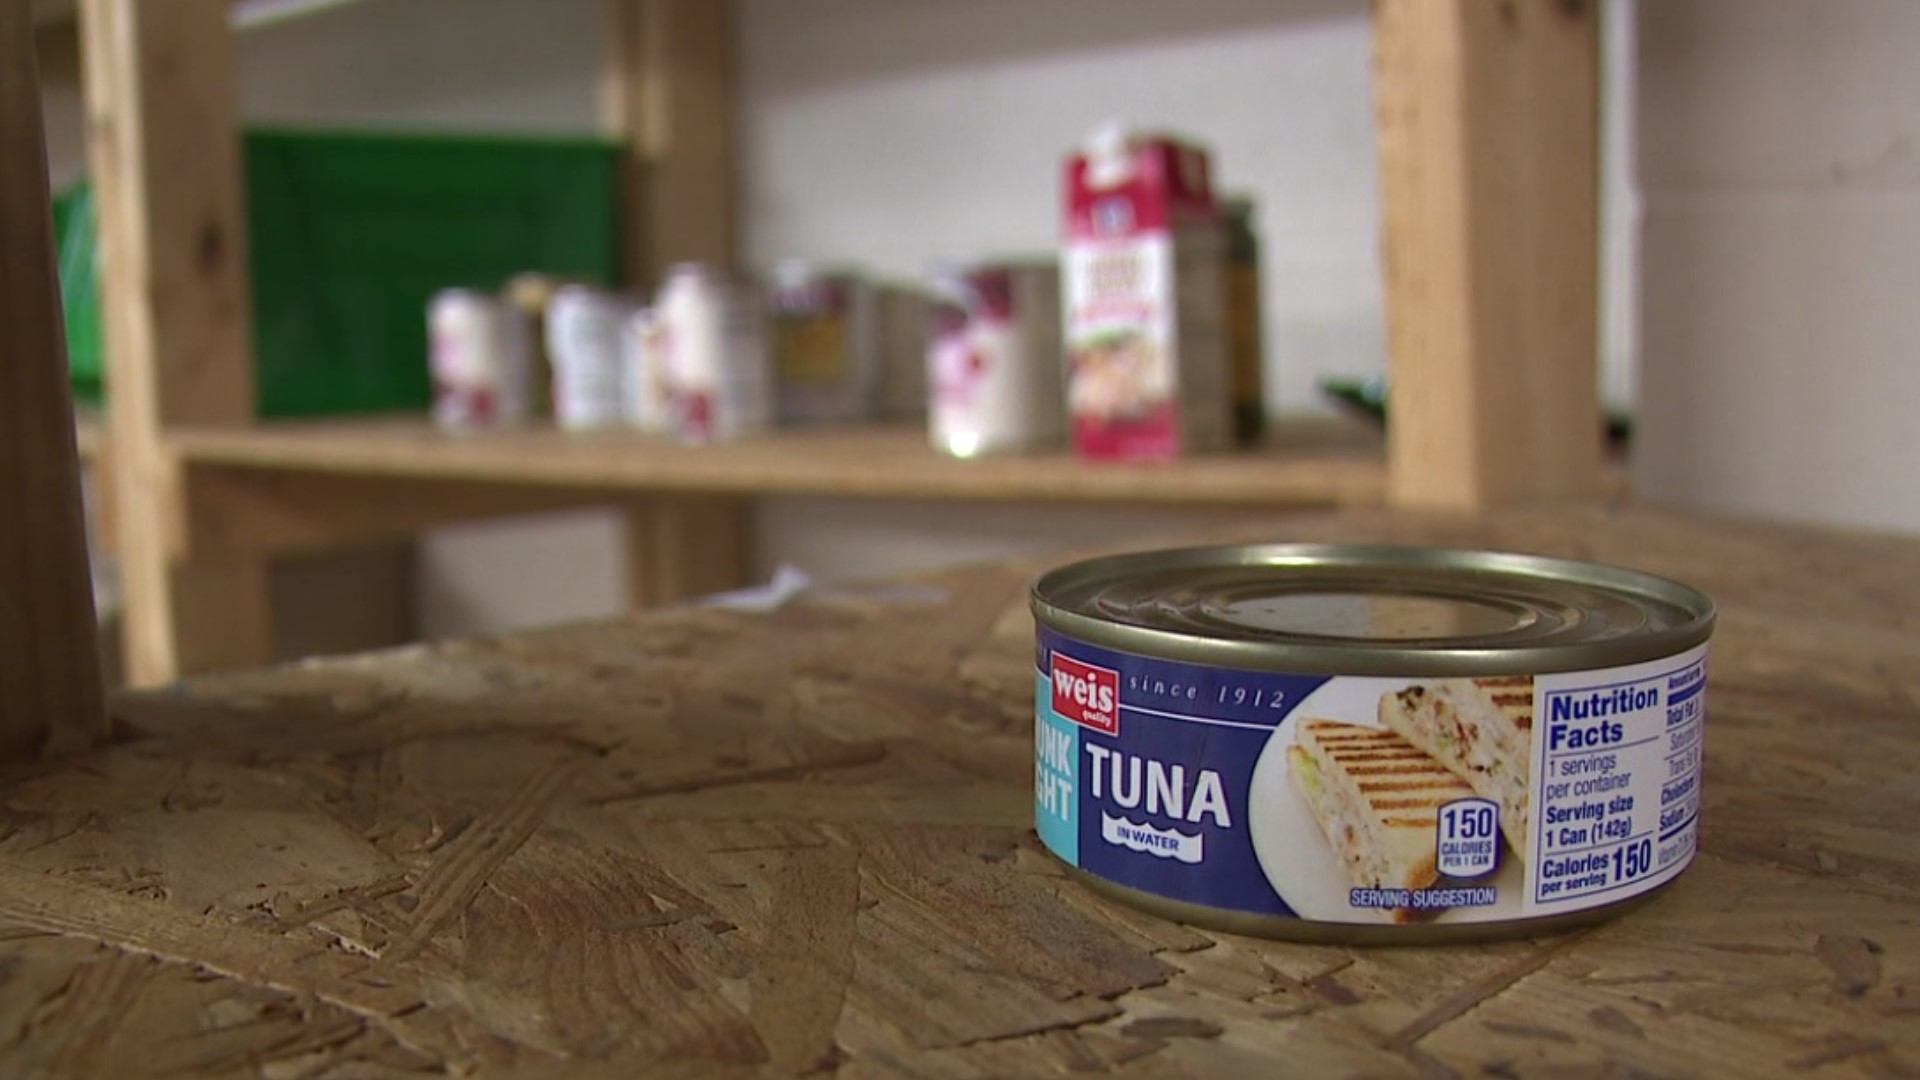 A group is replenishing the shelves at food pantries in Lackawanna County. Newswatch 16's Courtney Harrison shows us why the need is greater this time of year.